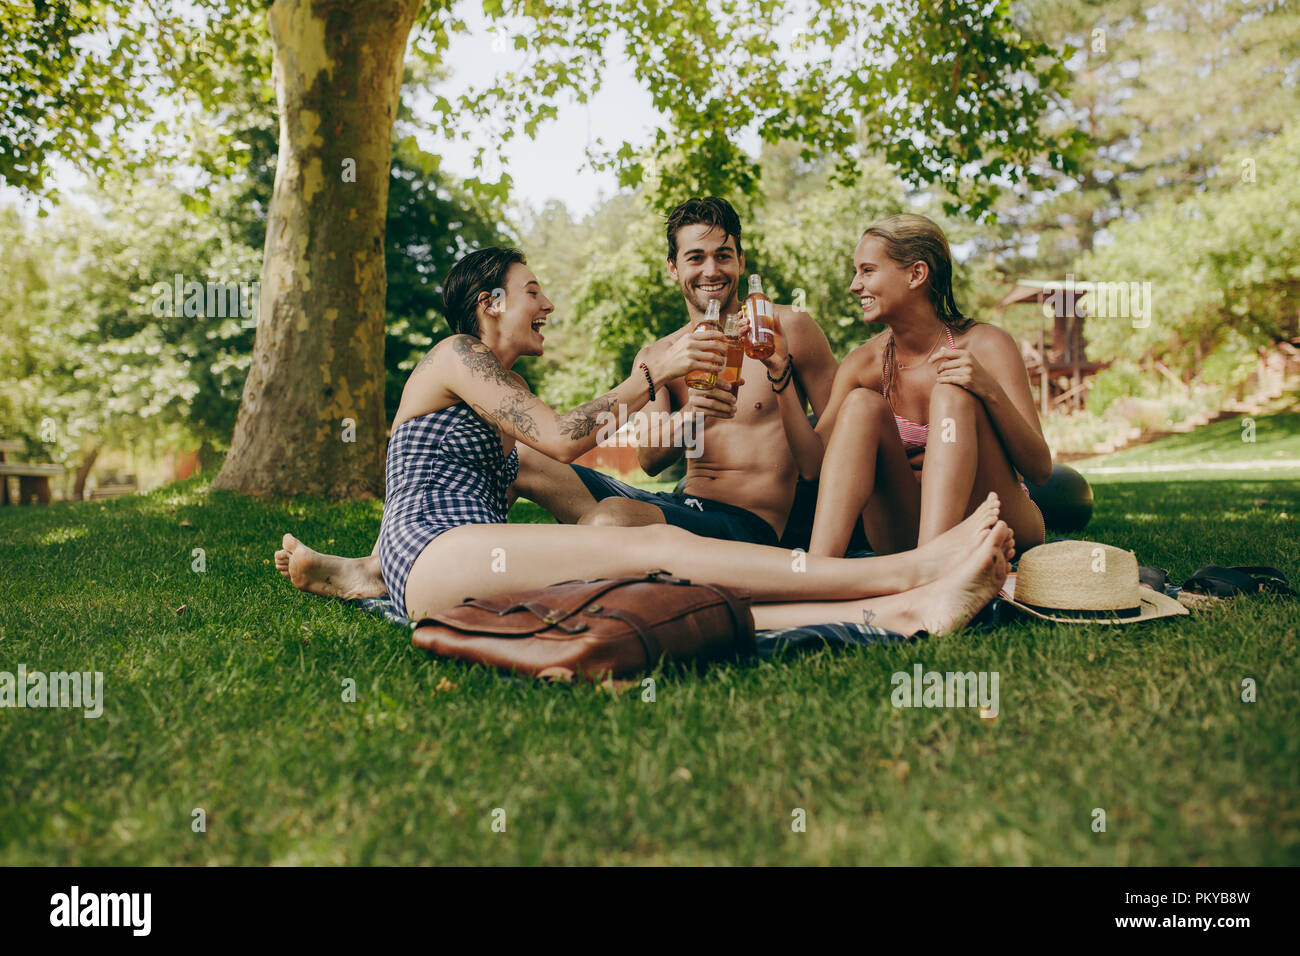 Two women in bikini toasting their drinks with a male friend sitting in a park. Friends enjoying and relaxing in park with drinks in hand. Stock Photo